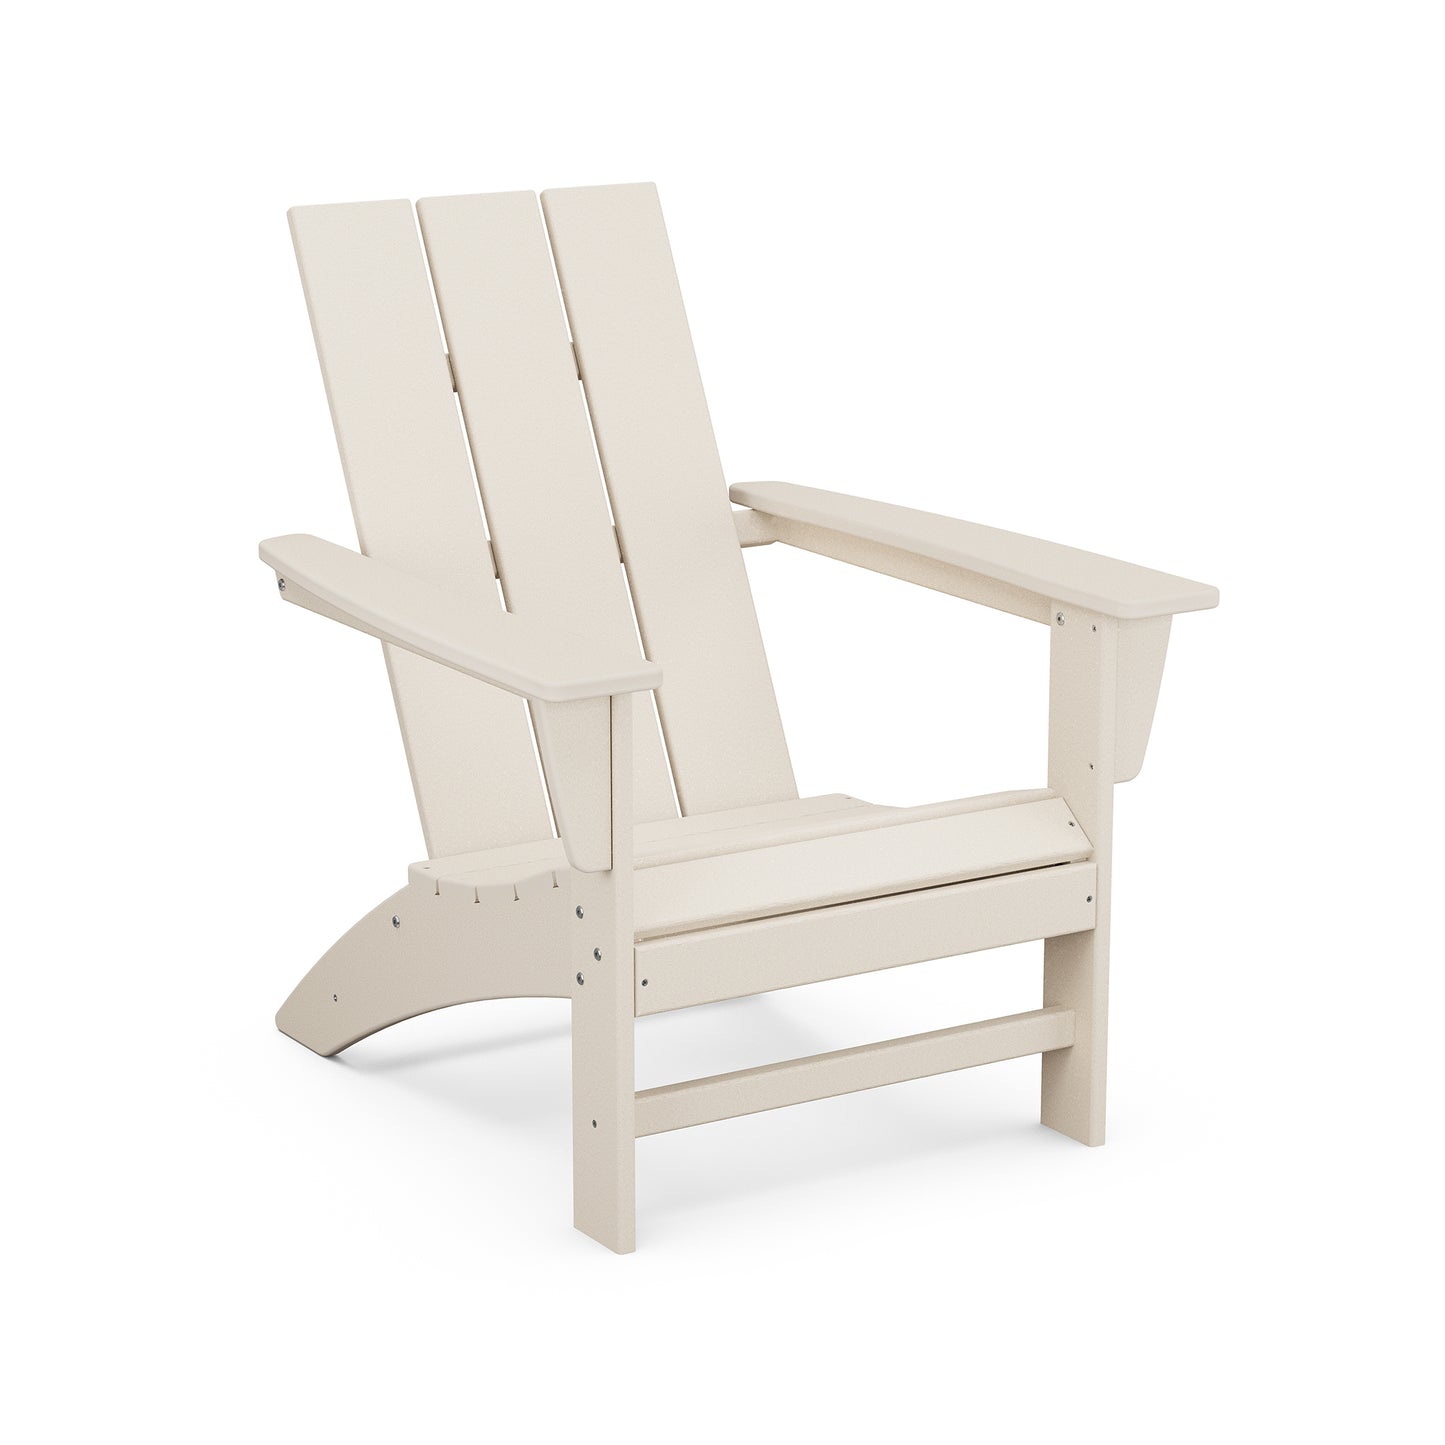 A POLYWOOD Modern Adirondack chair on a white background.